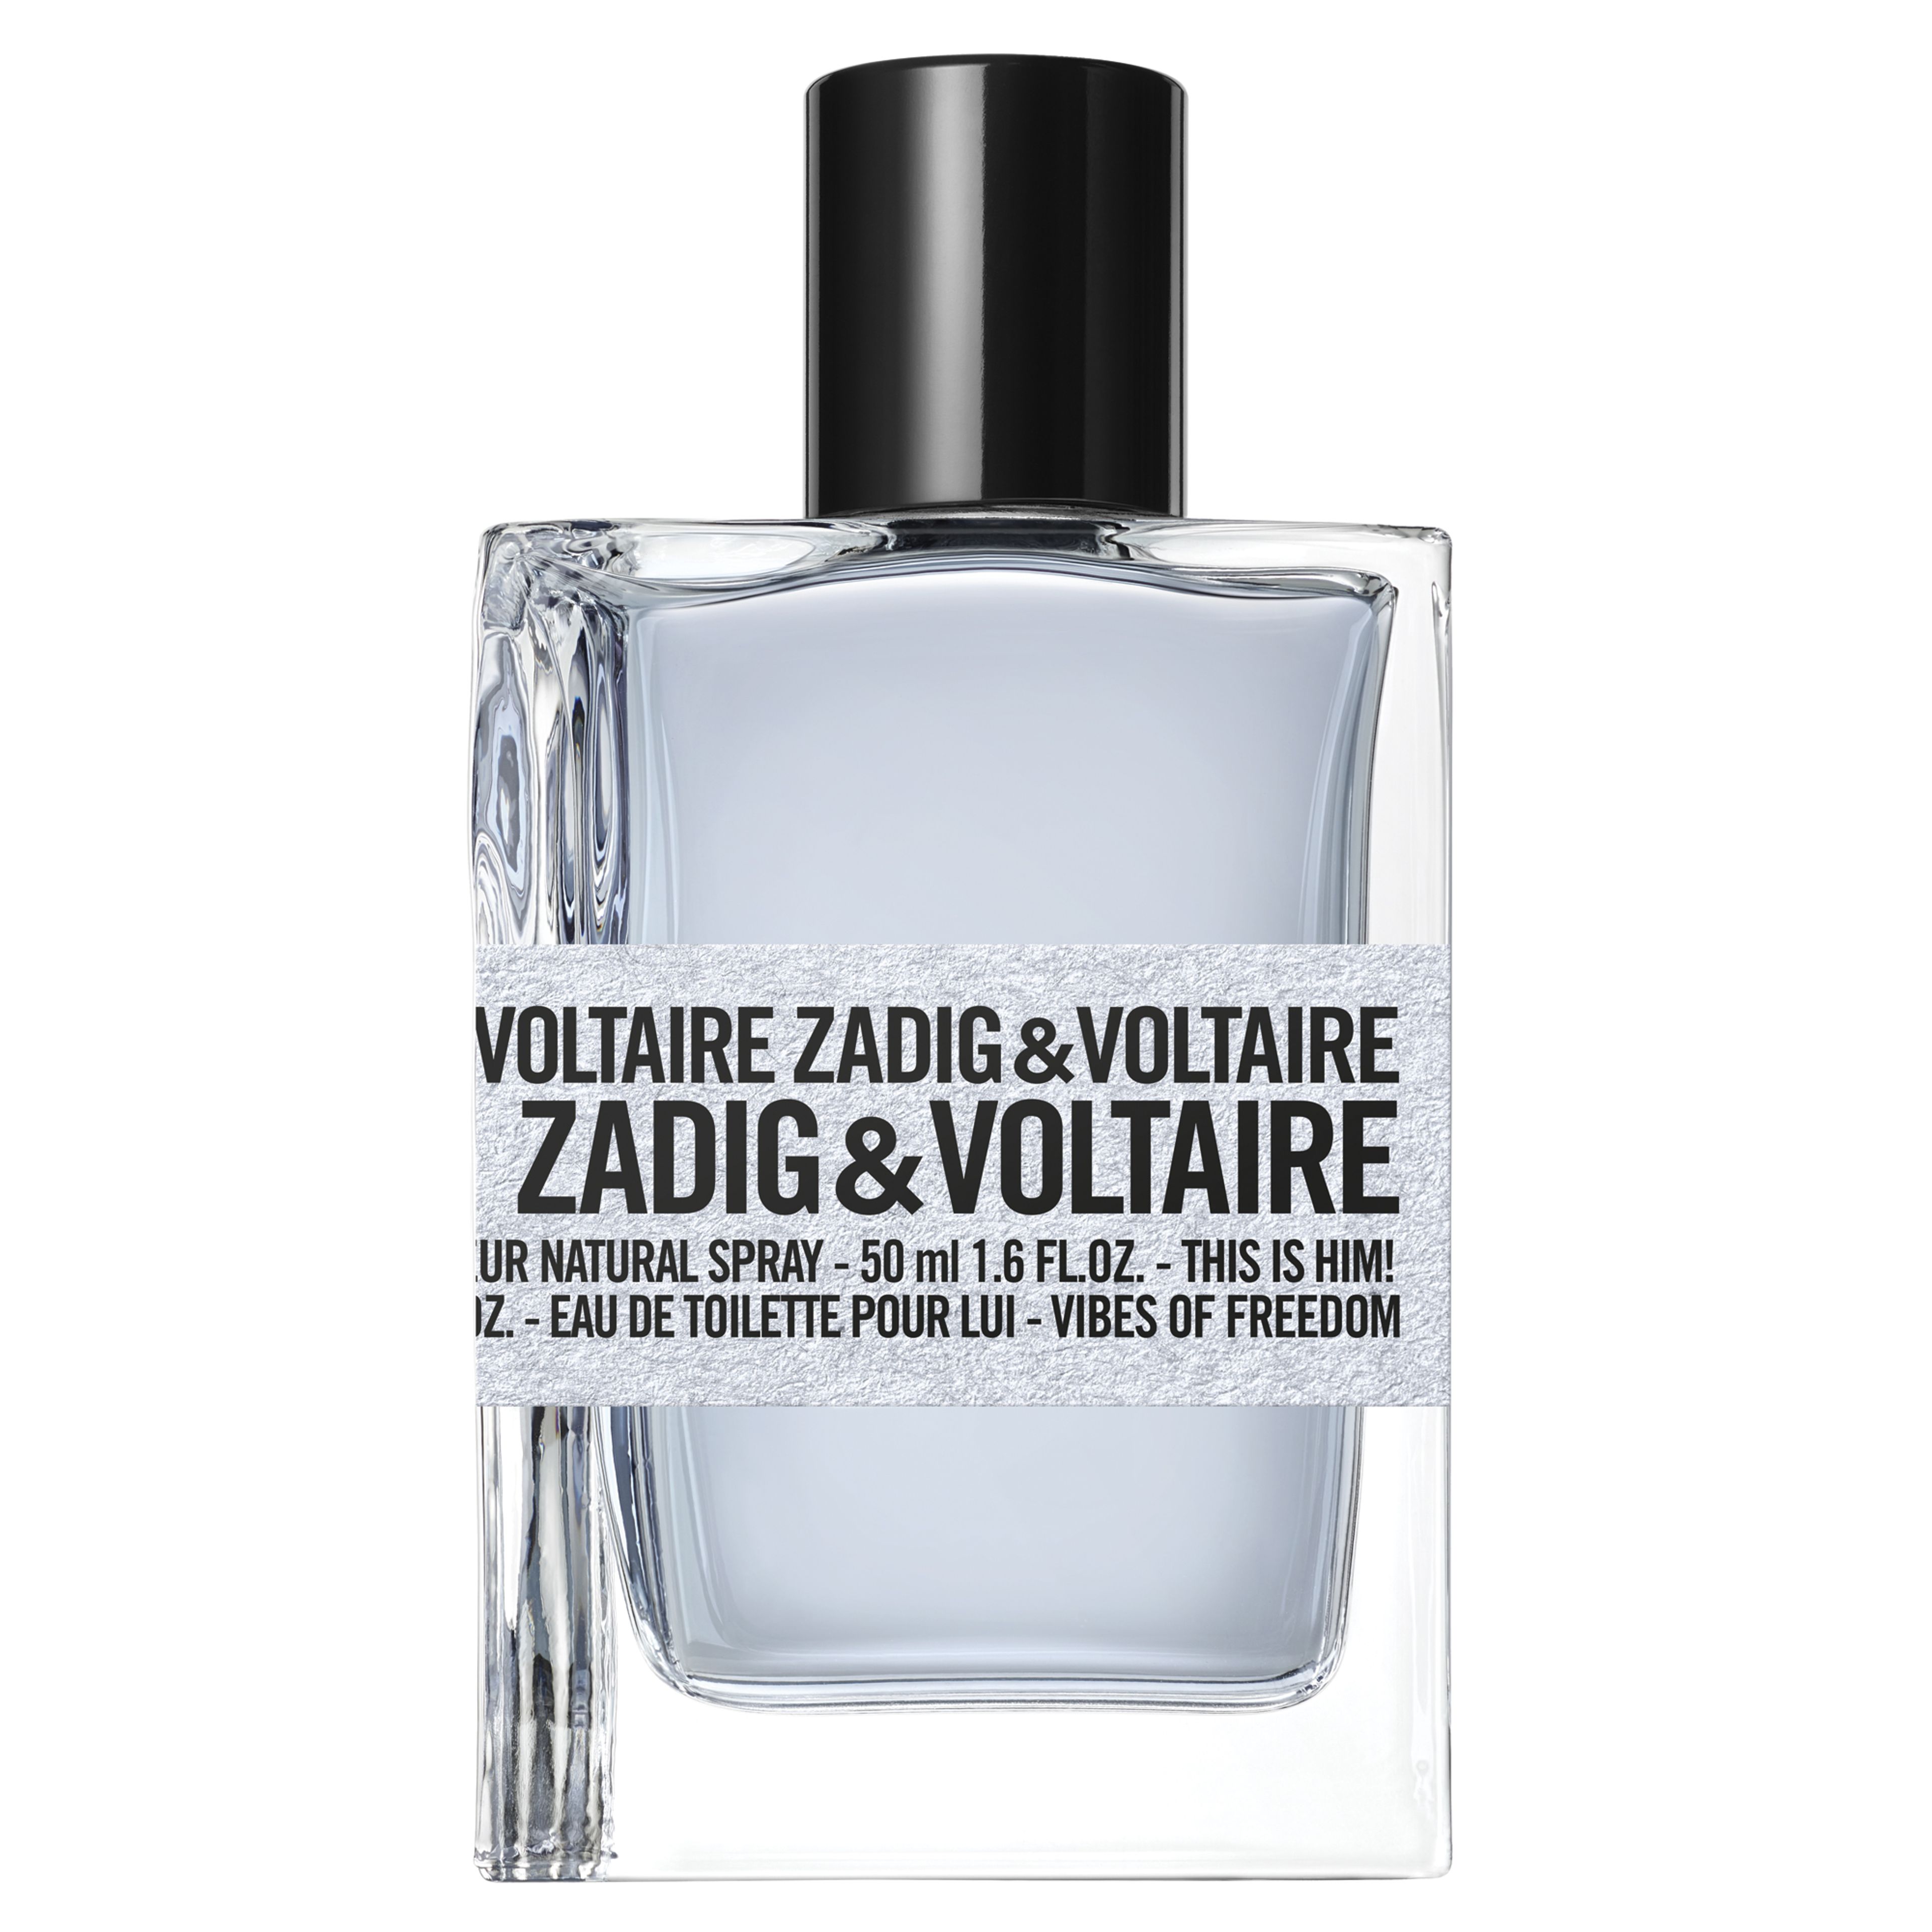 Zadig & Voltaire This Is Him! Vibes Of Freedom 1